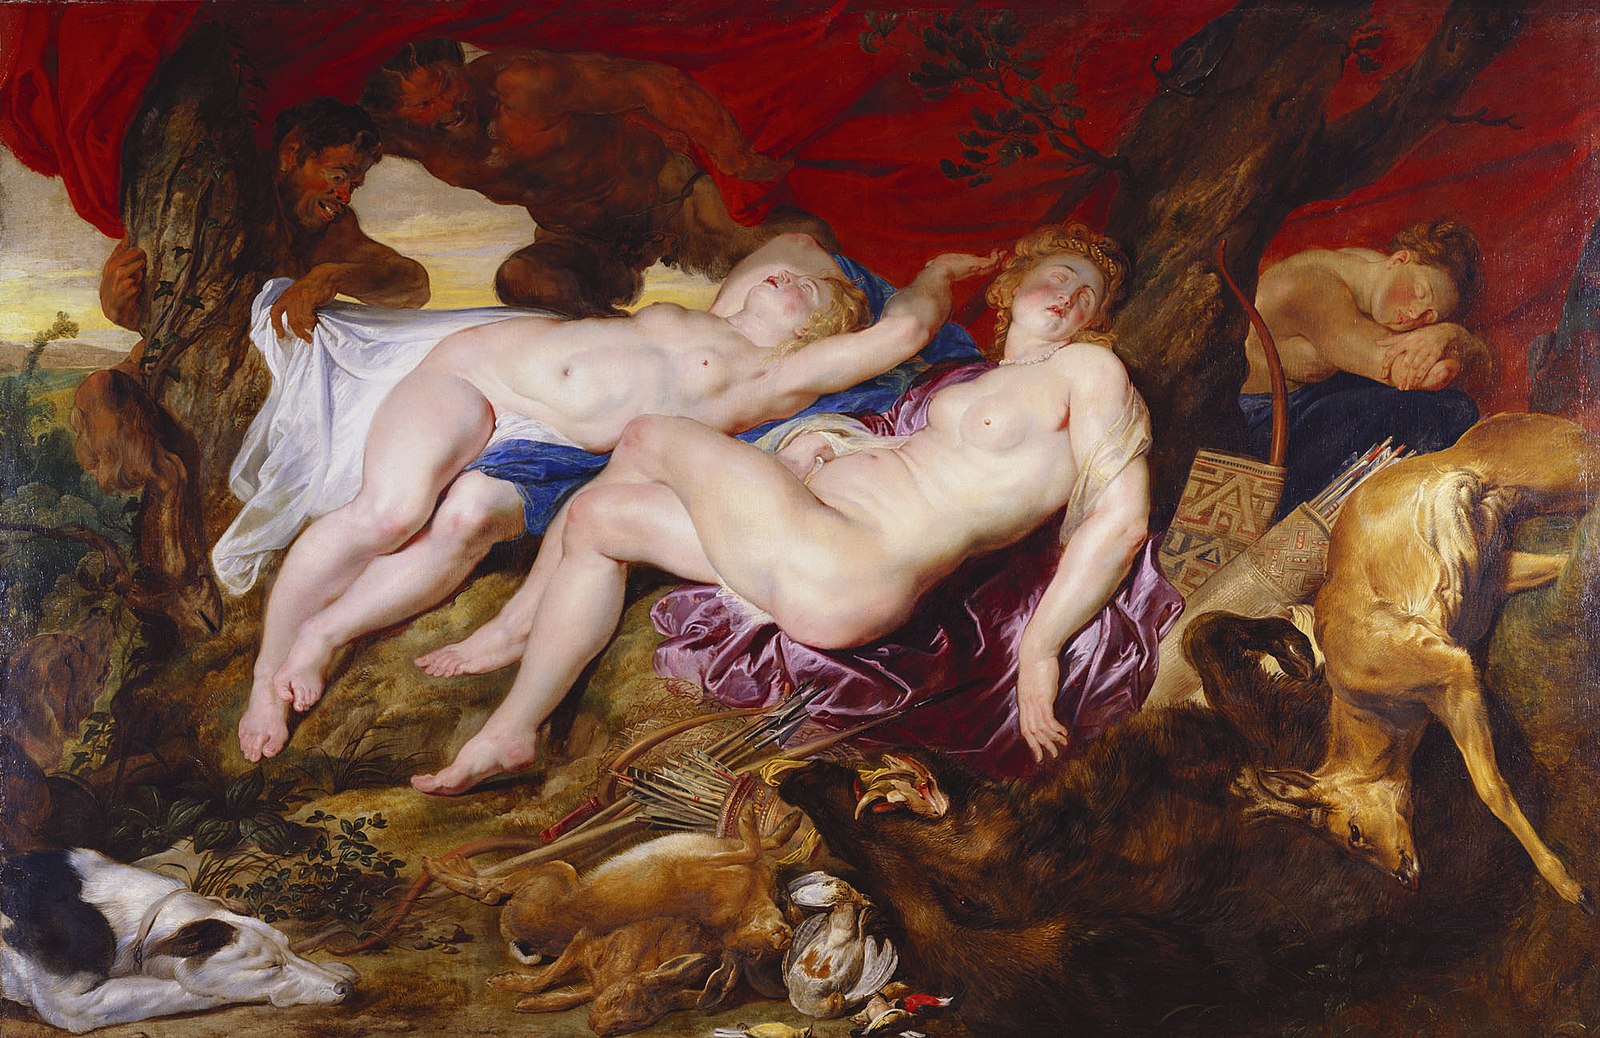 Peter_Paul_Rubens 1616 Diana_and_her_nymphs_spied_upon_by_satyrs